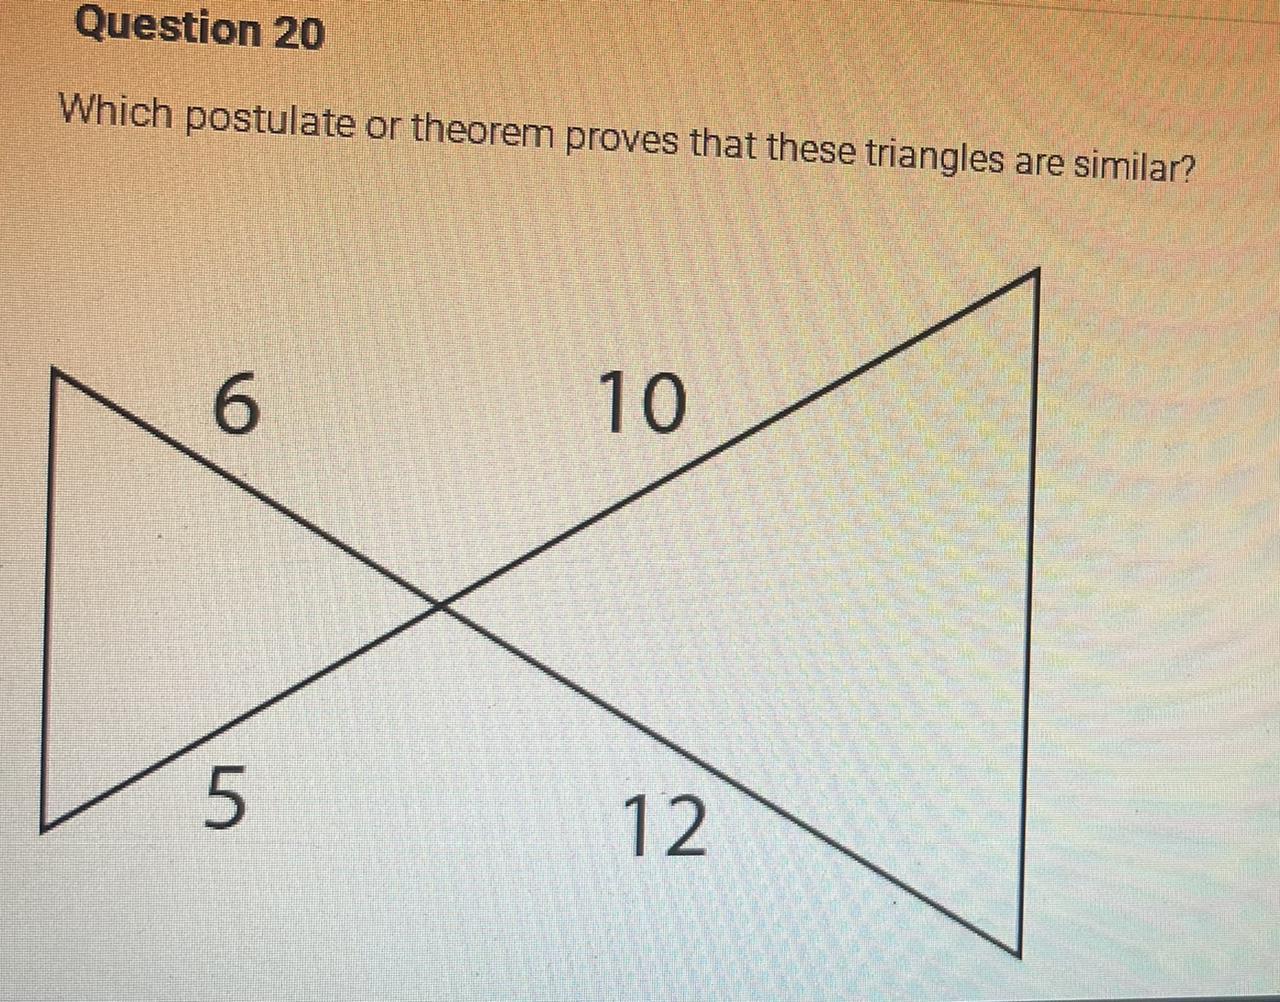 What Postulate Or Theorem Proves That These Triangles Are Similar?